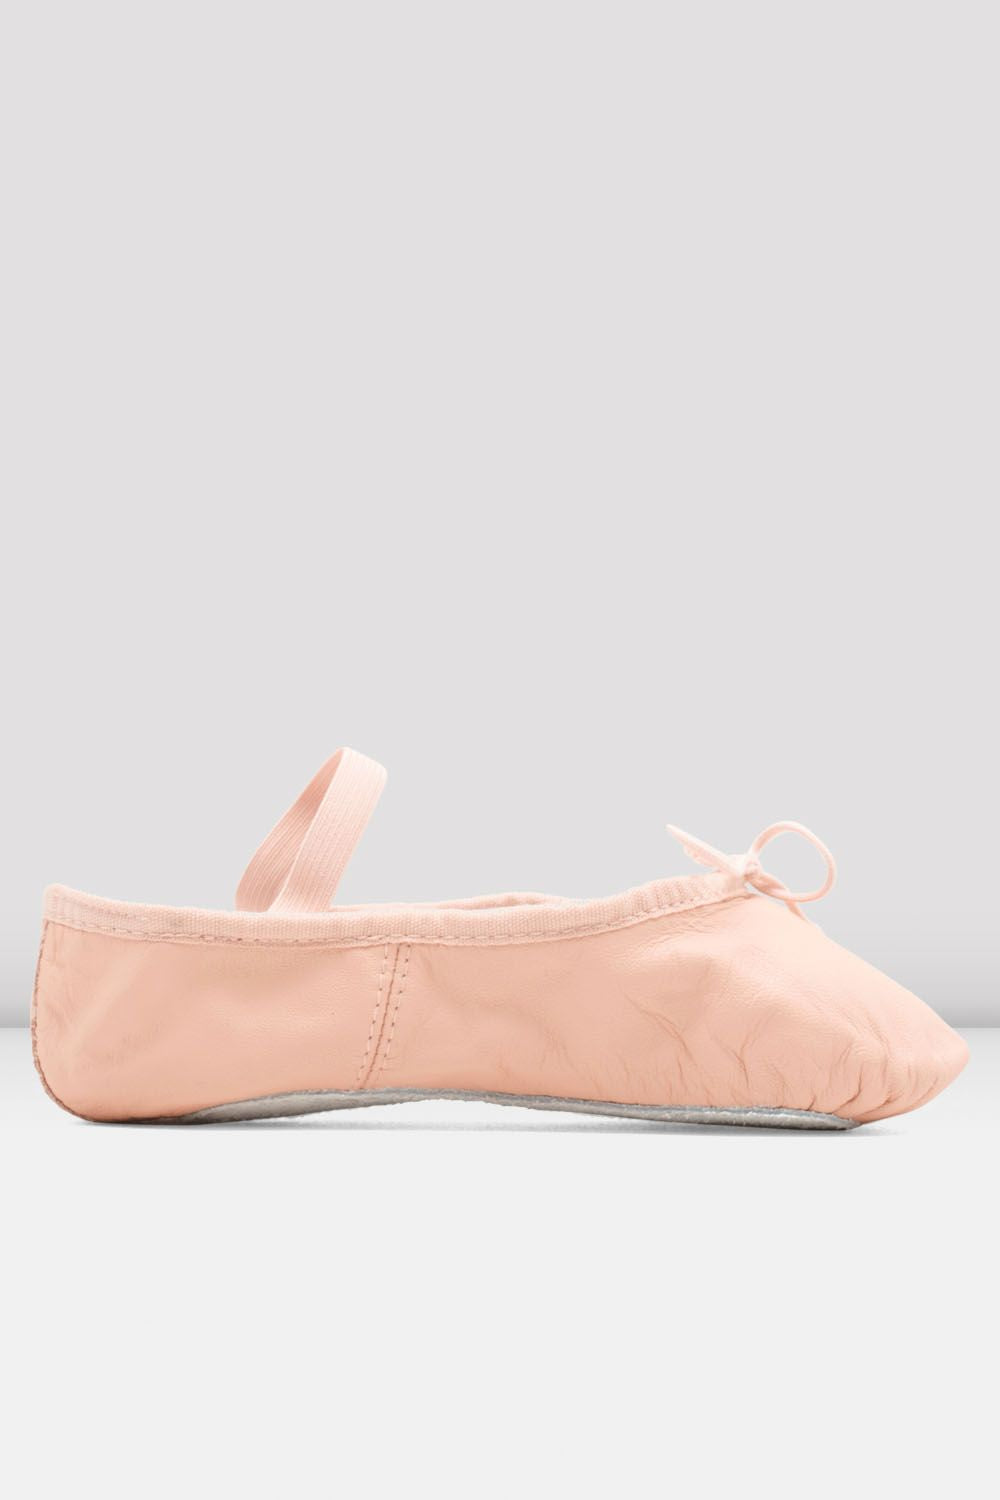 BLOCH Childrens Bunnyhop Ballet Shoes, Pink Leather